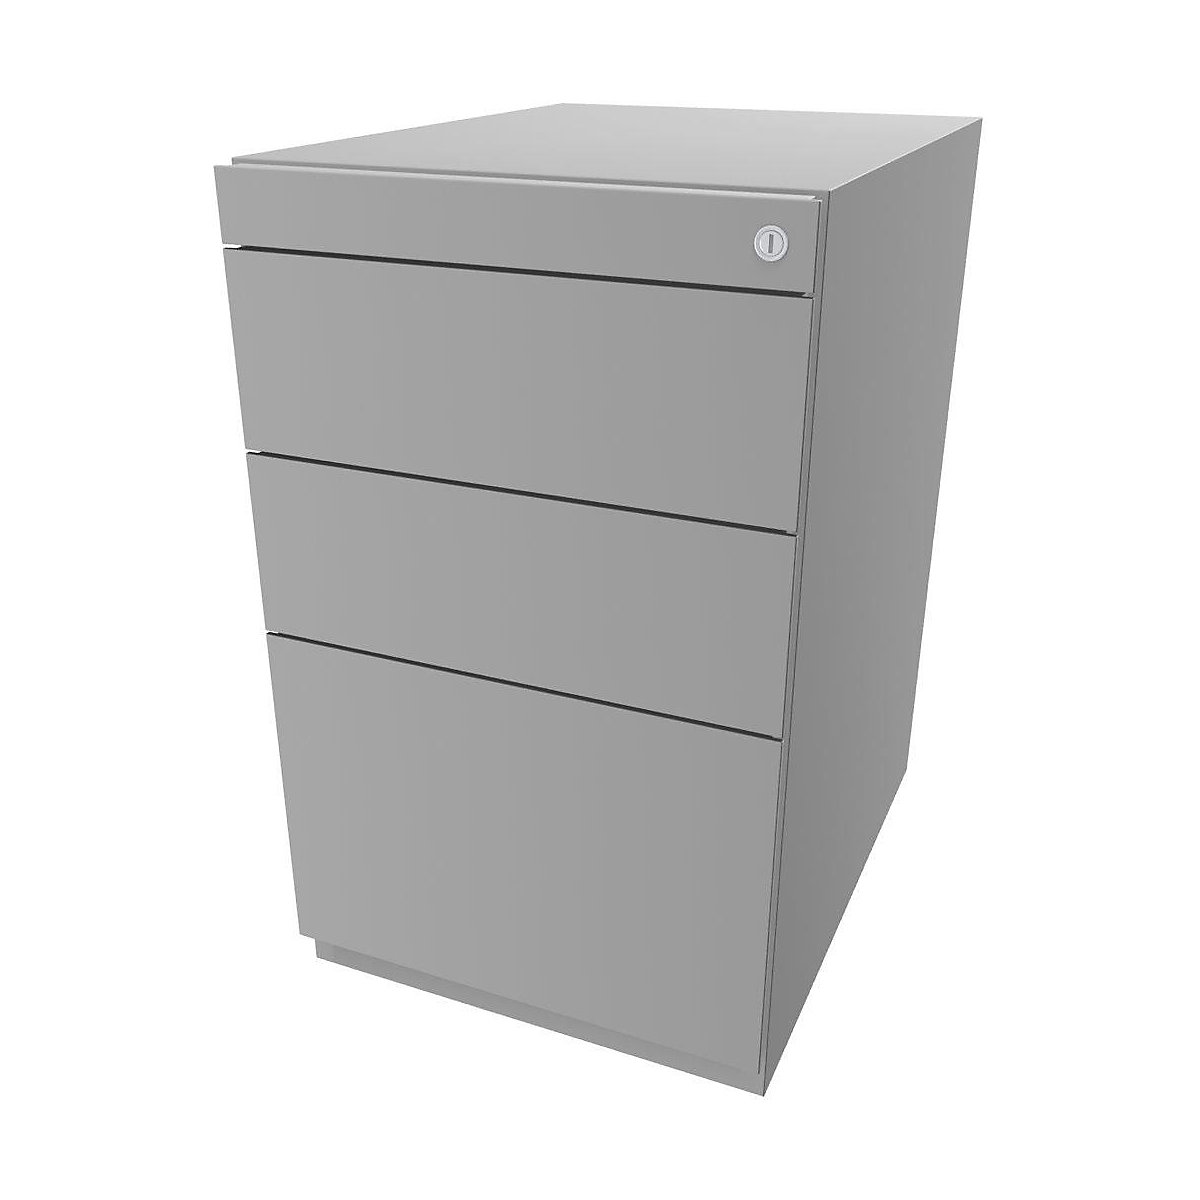 Note™ fixed pedestal, with 2 universal drawers, 1 suspension file drawer – BISLEY, without top, depth 565 mm, light grey-8